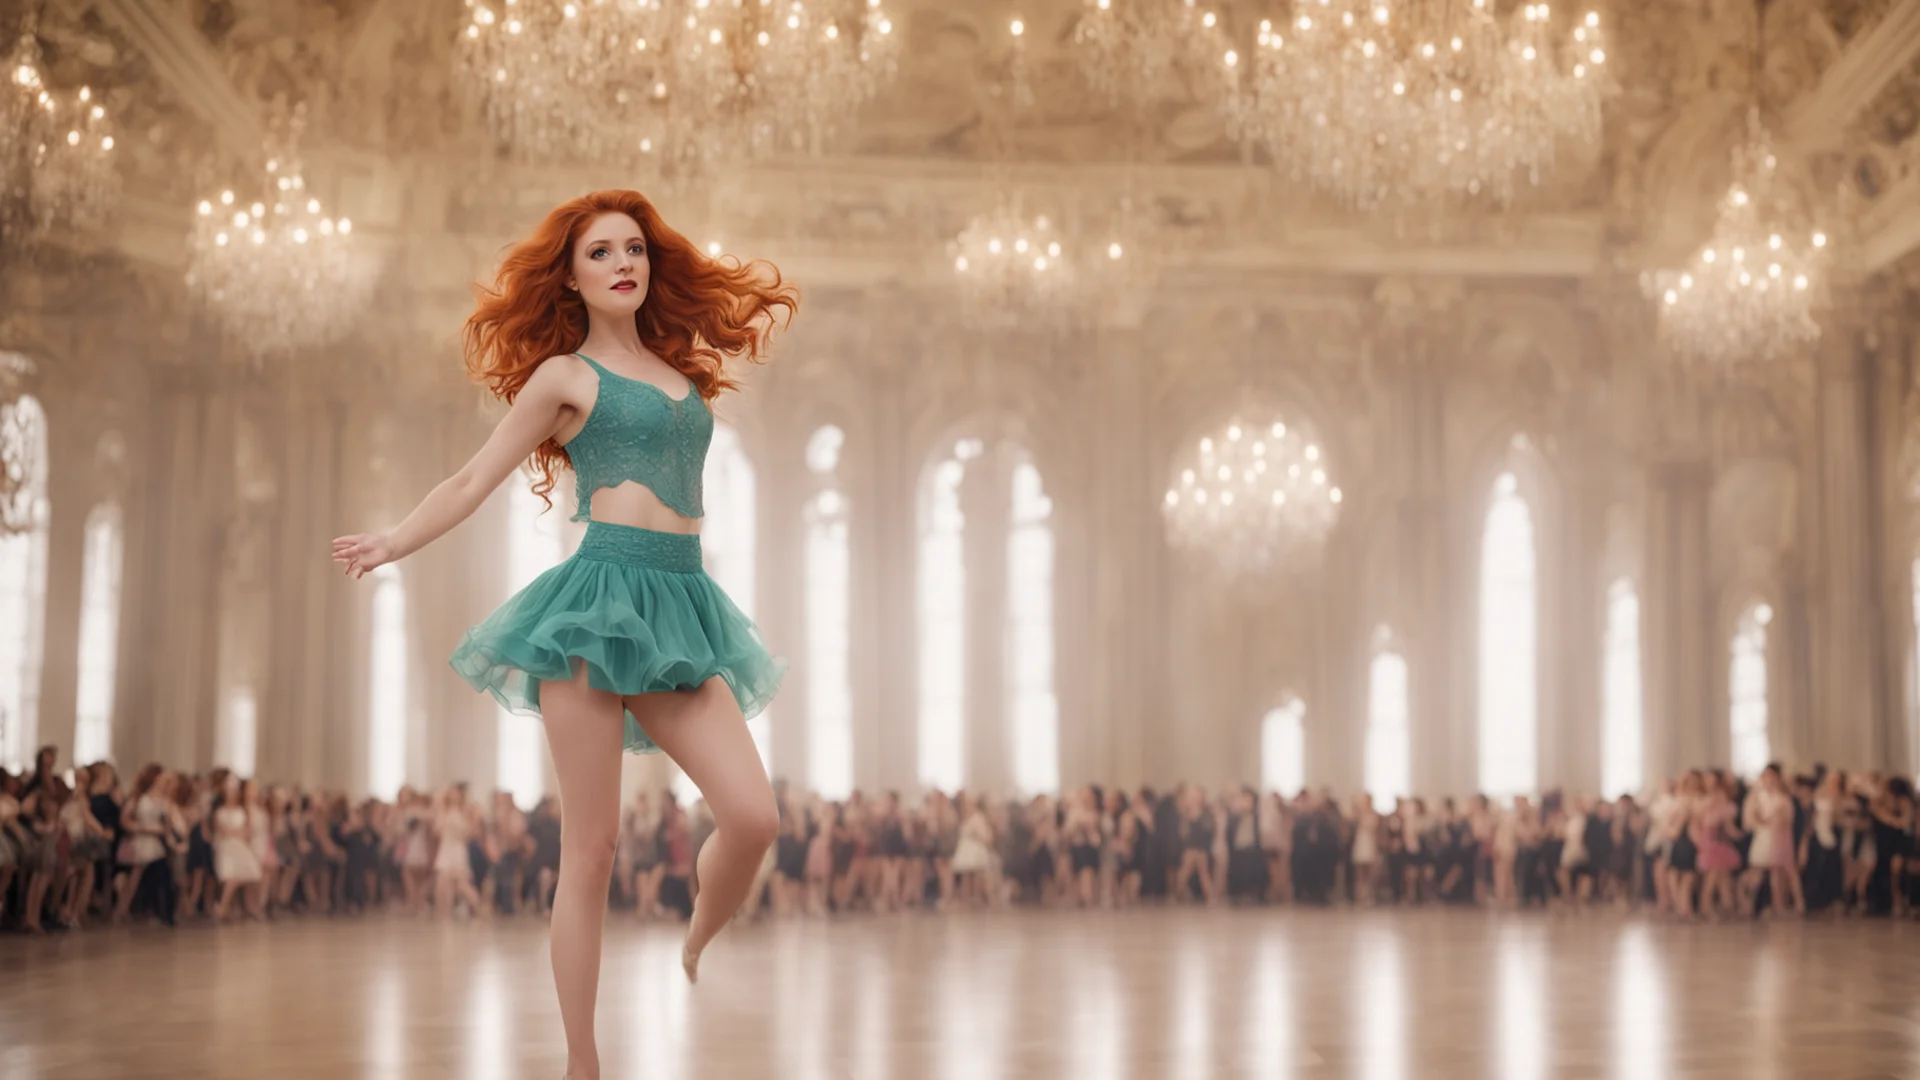 aia ginger haired girl with short skirt dancing in a gigantic ballroom good looking trending fantastic 1 wide